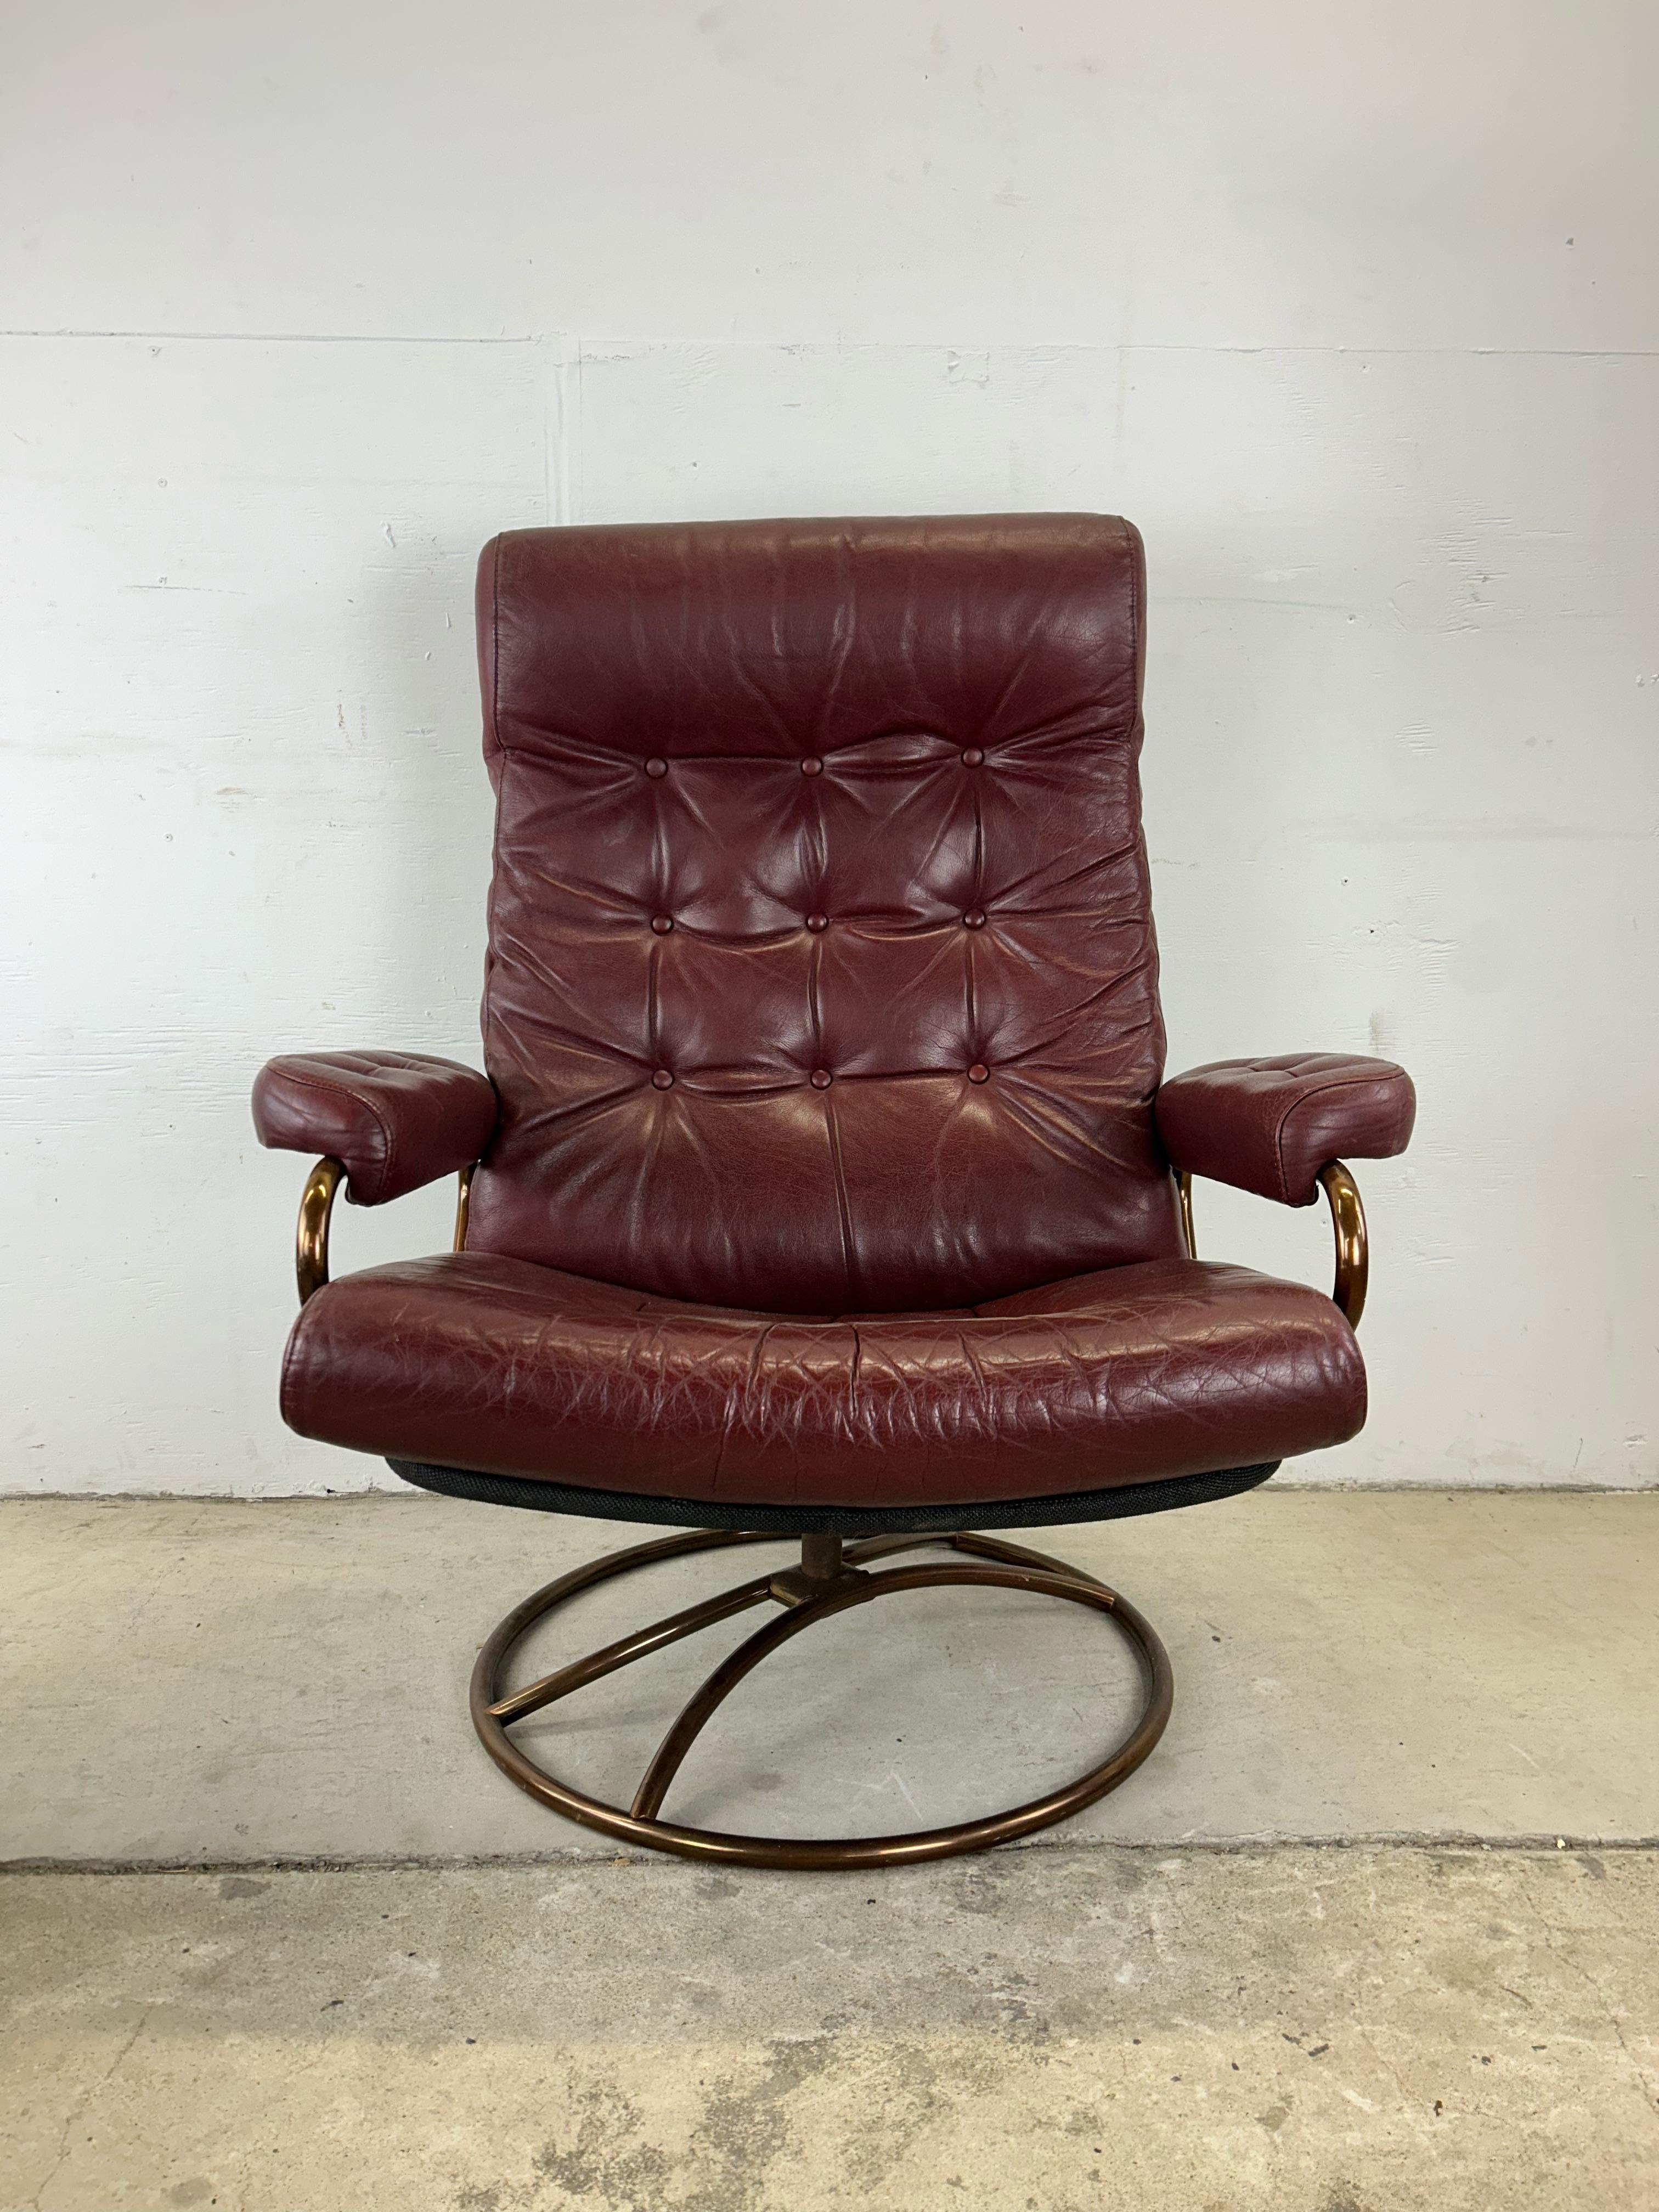 Scandinavian Modern Red Leather Ekornes Stressless Recliner with Ottoman In Excellent Condition For Sale In Freehold, NJ